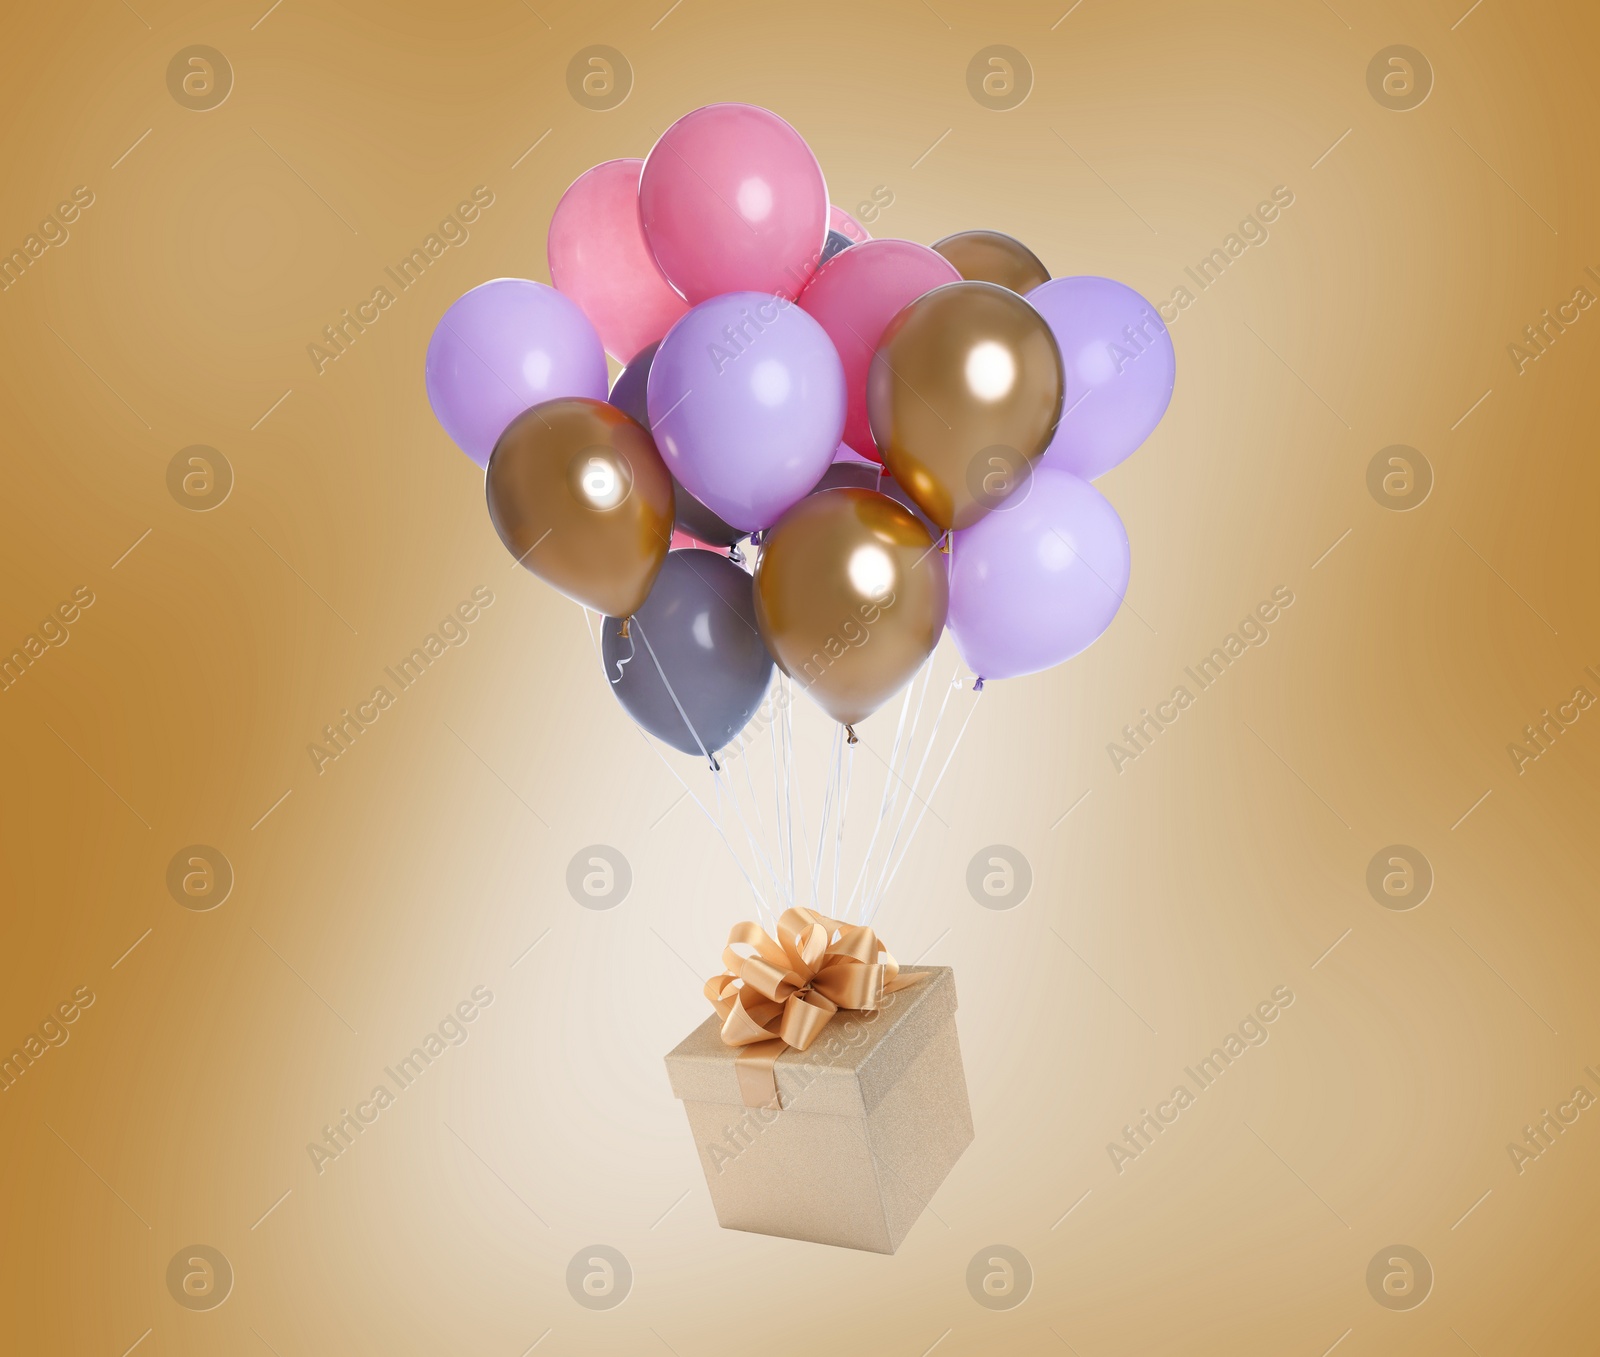 Image of Many balloons tied to gift box on golden background